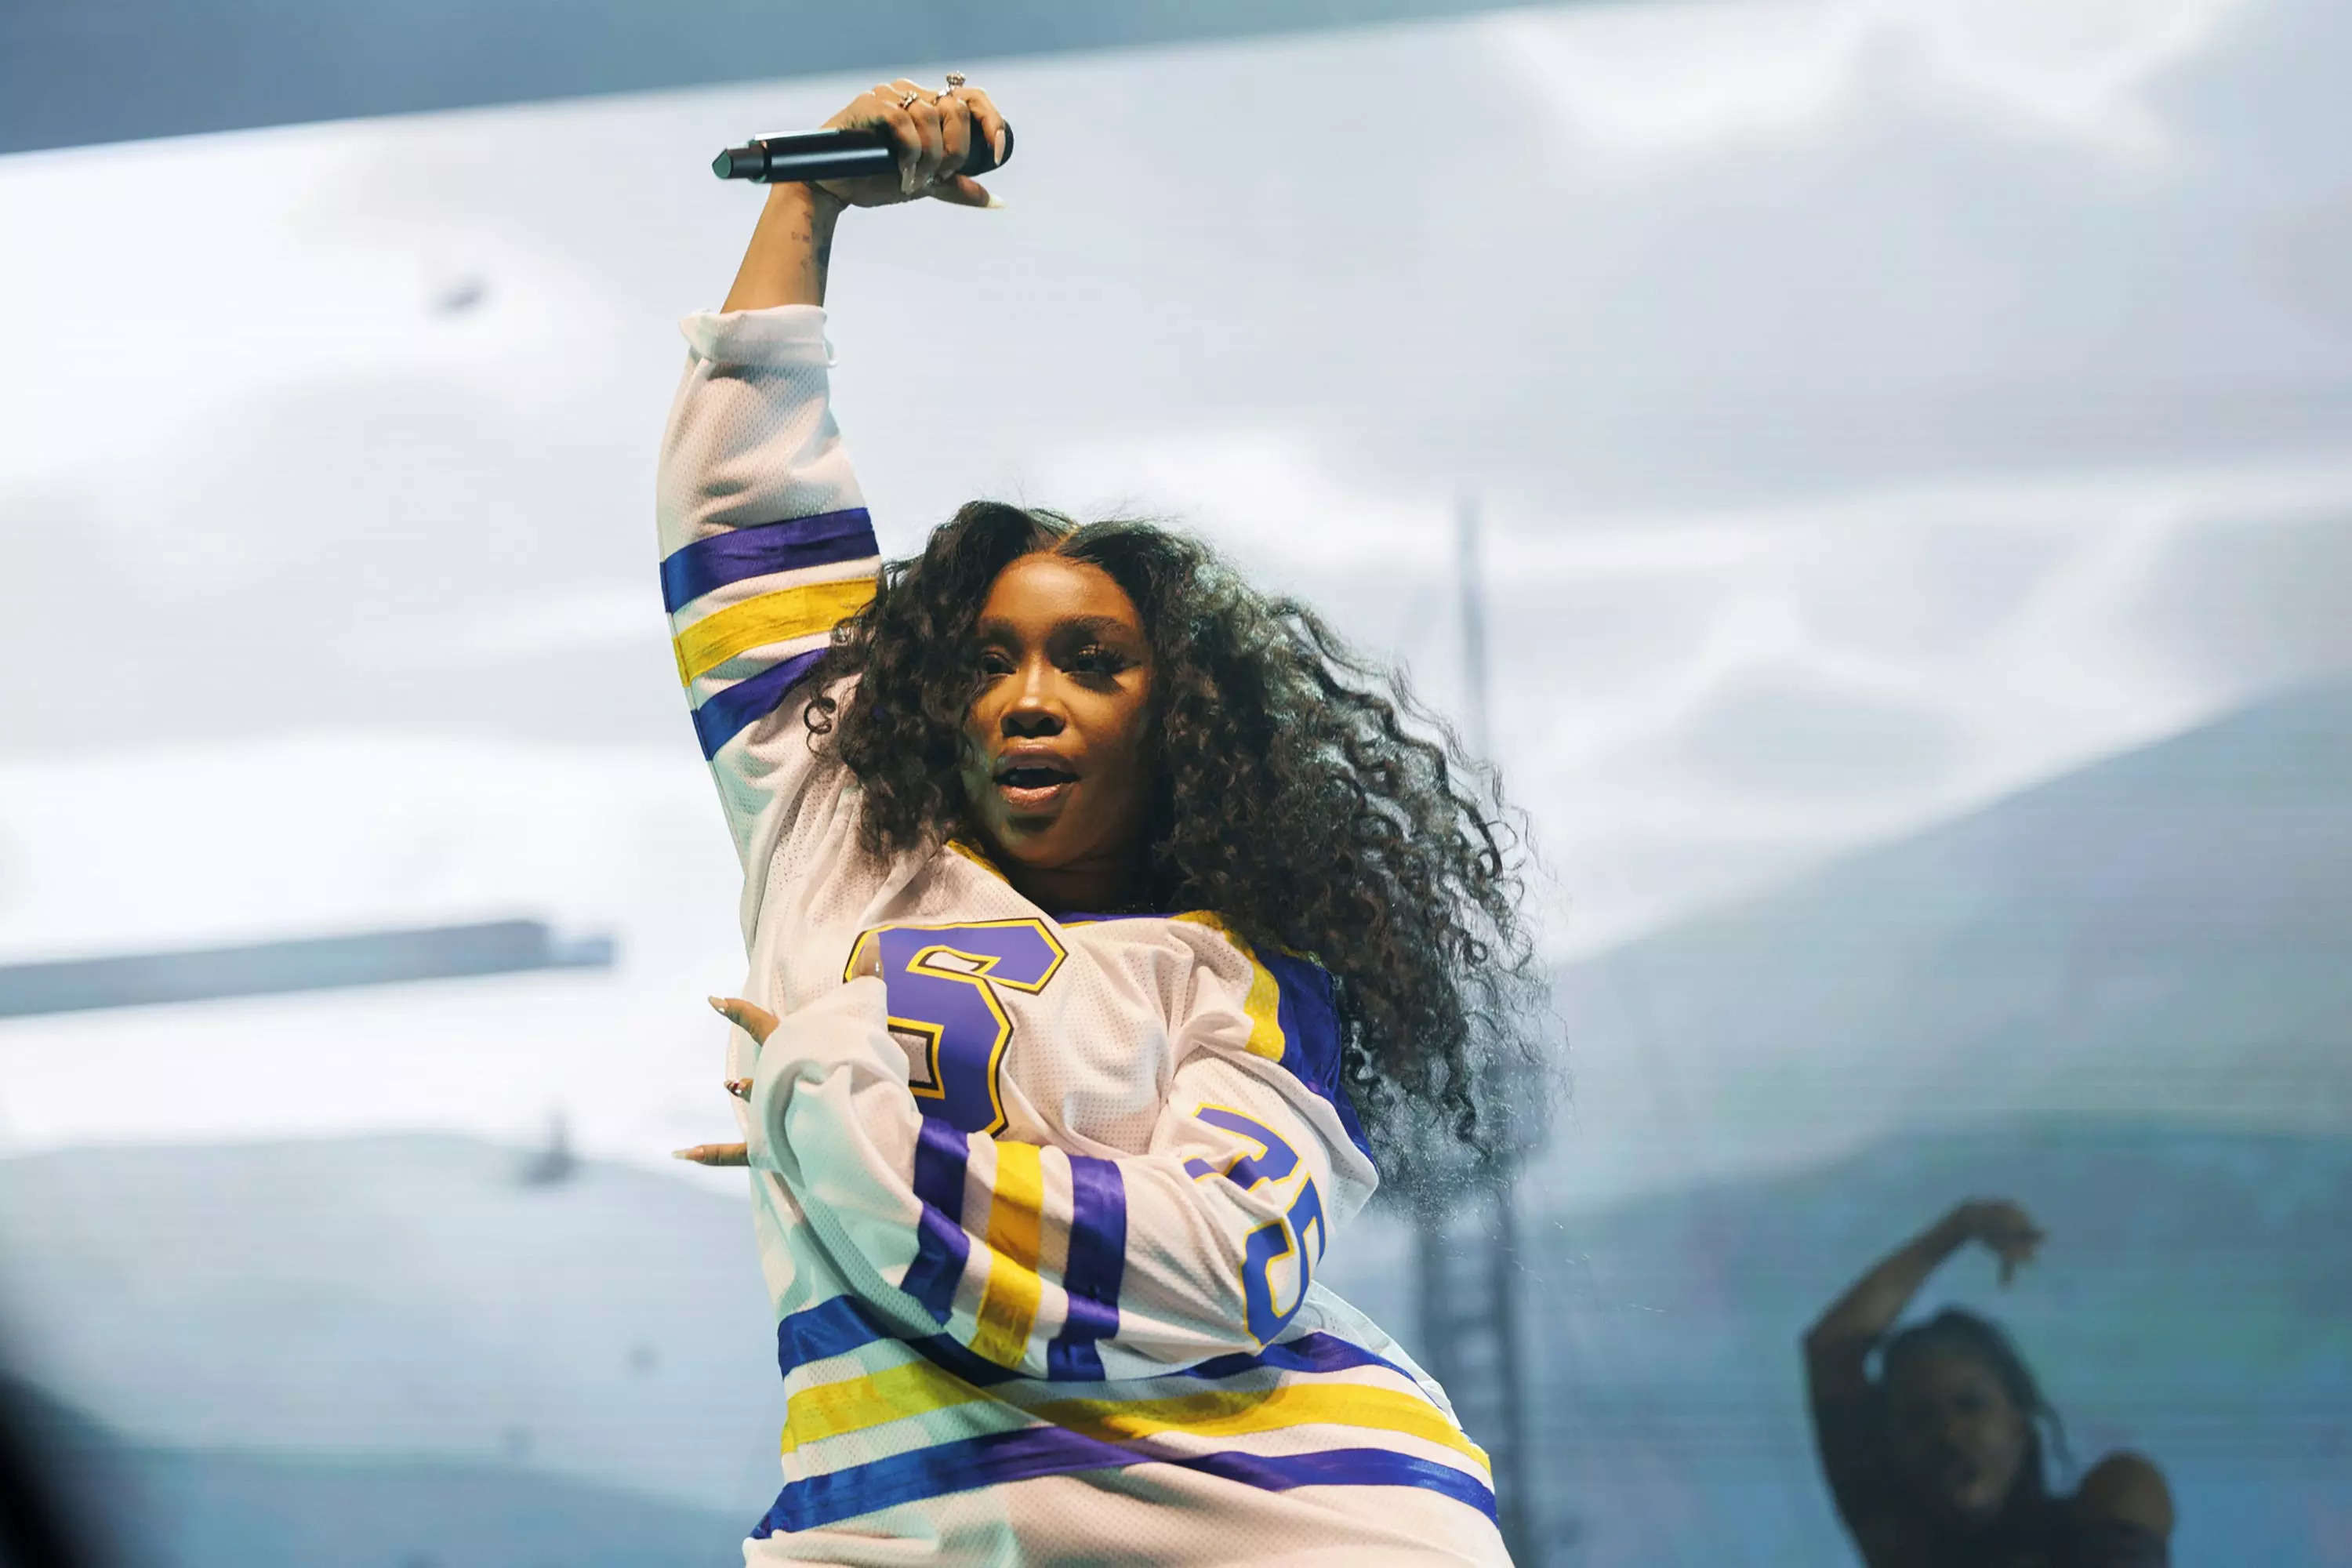 SZA performs at the United Center on Feb. 22, 2023, in Chicago.